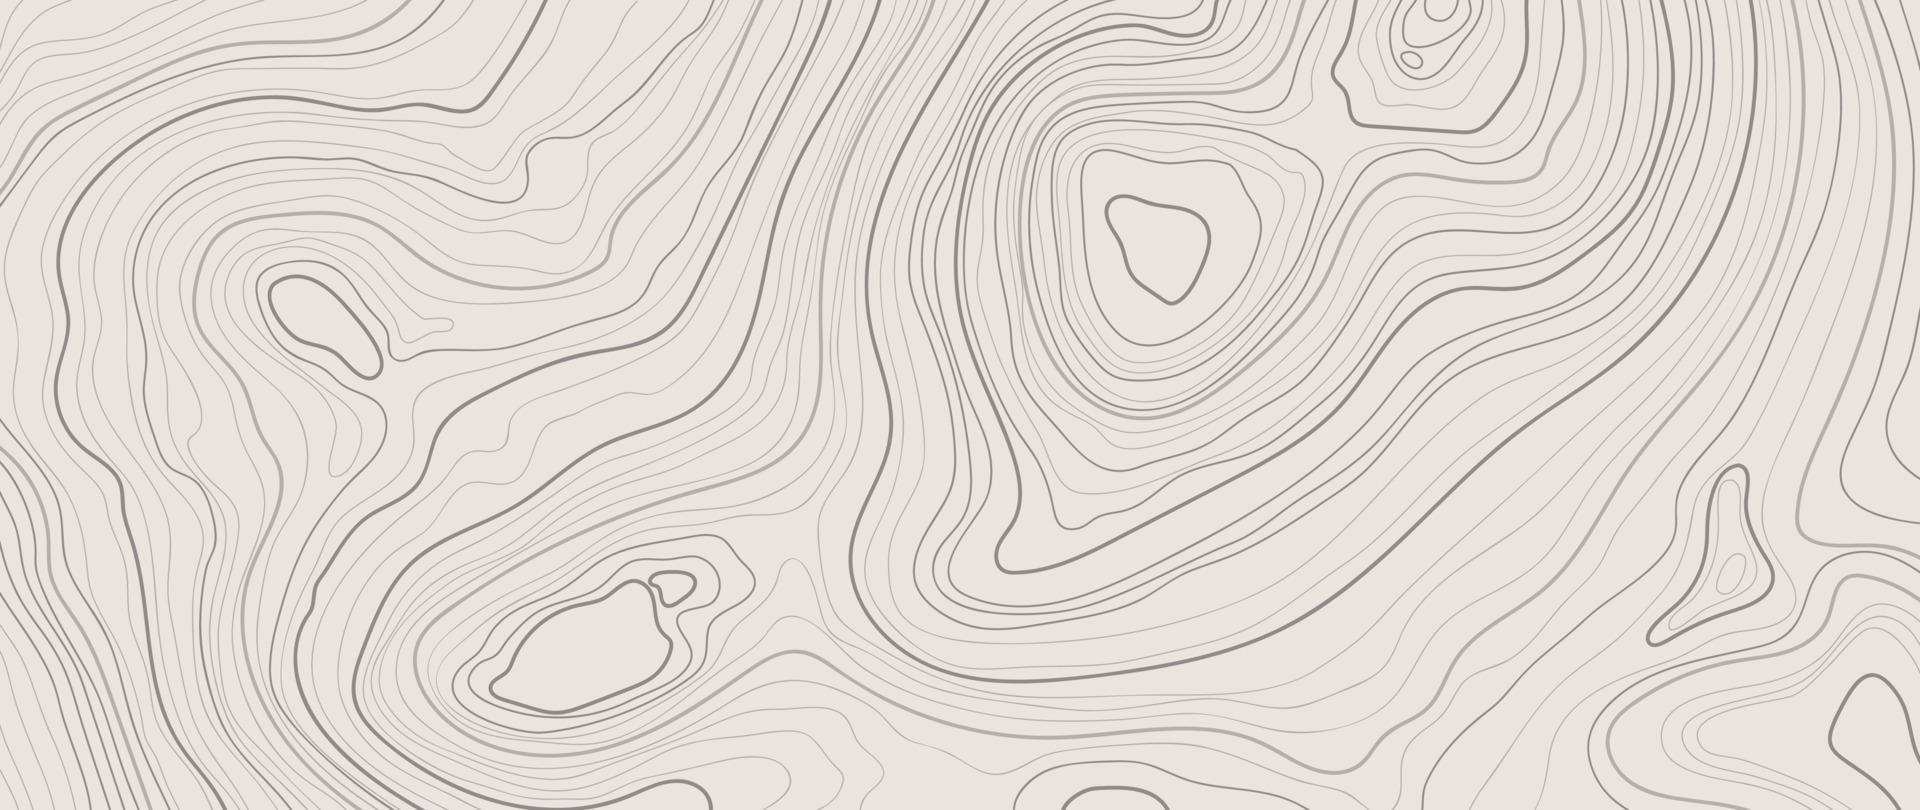 Abstract line art background vector. Mountain topographic terrain map ...